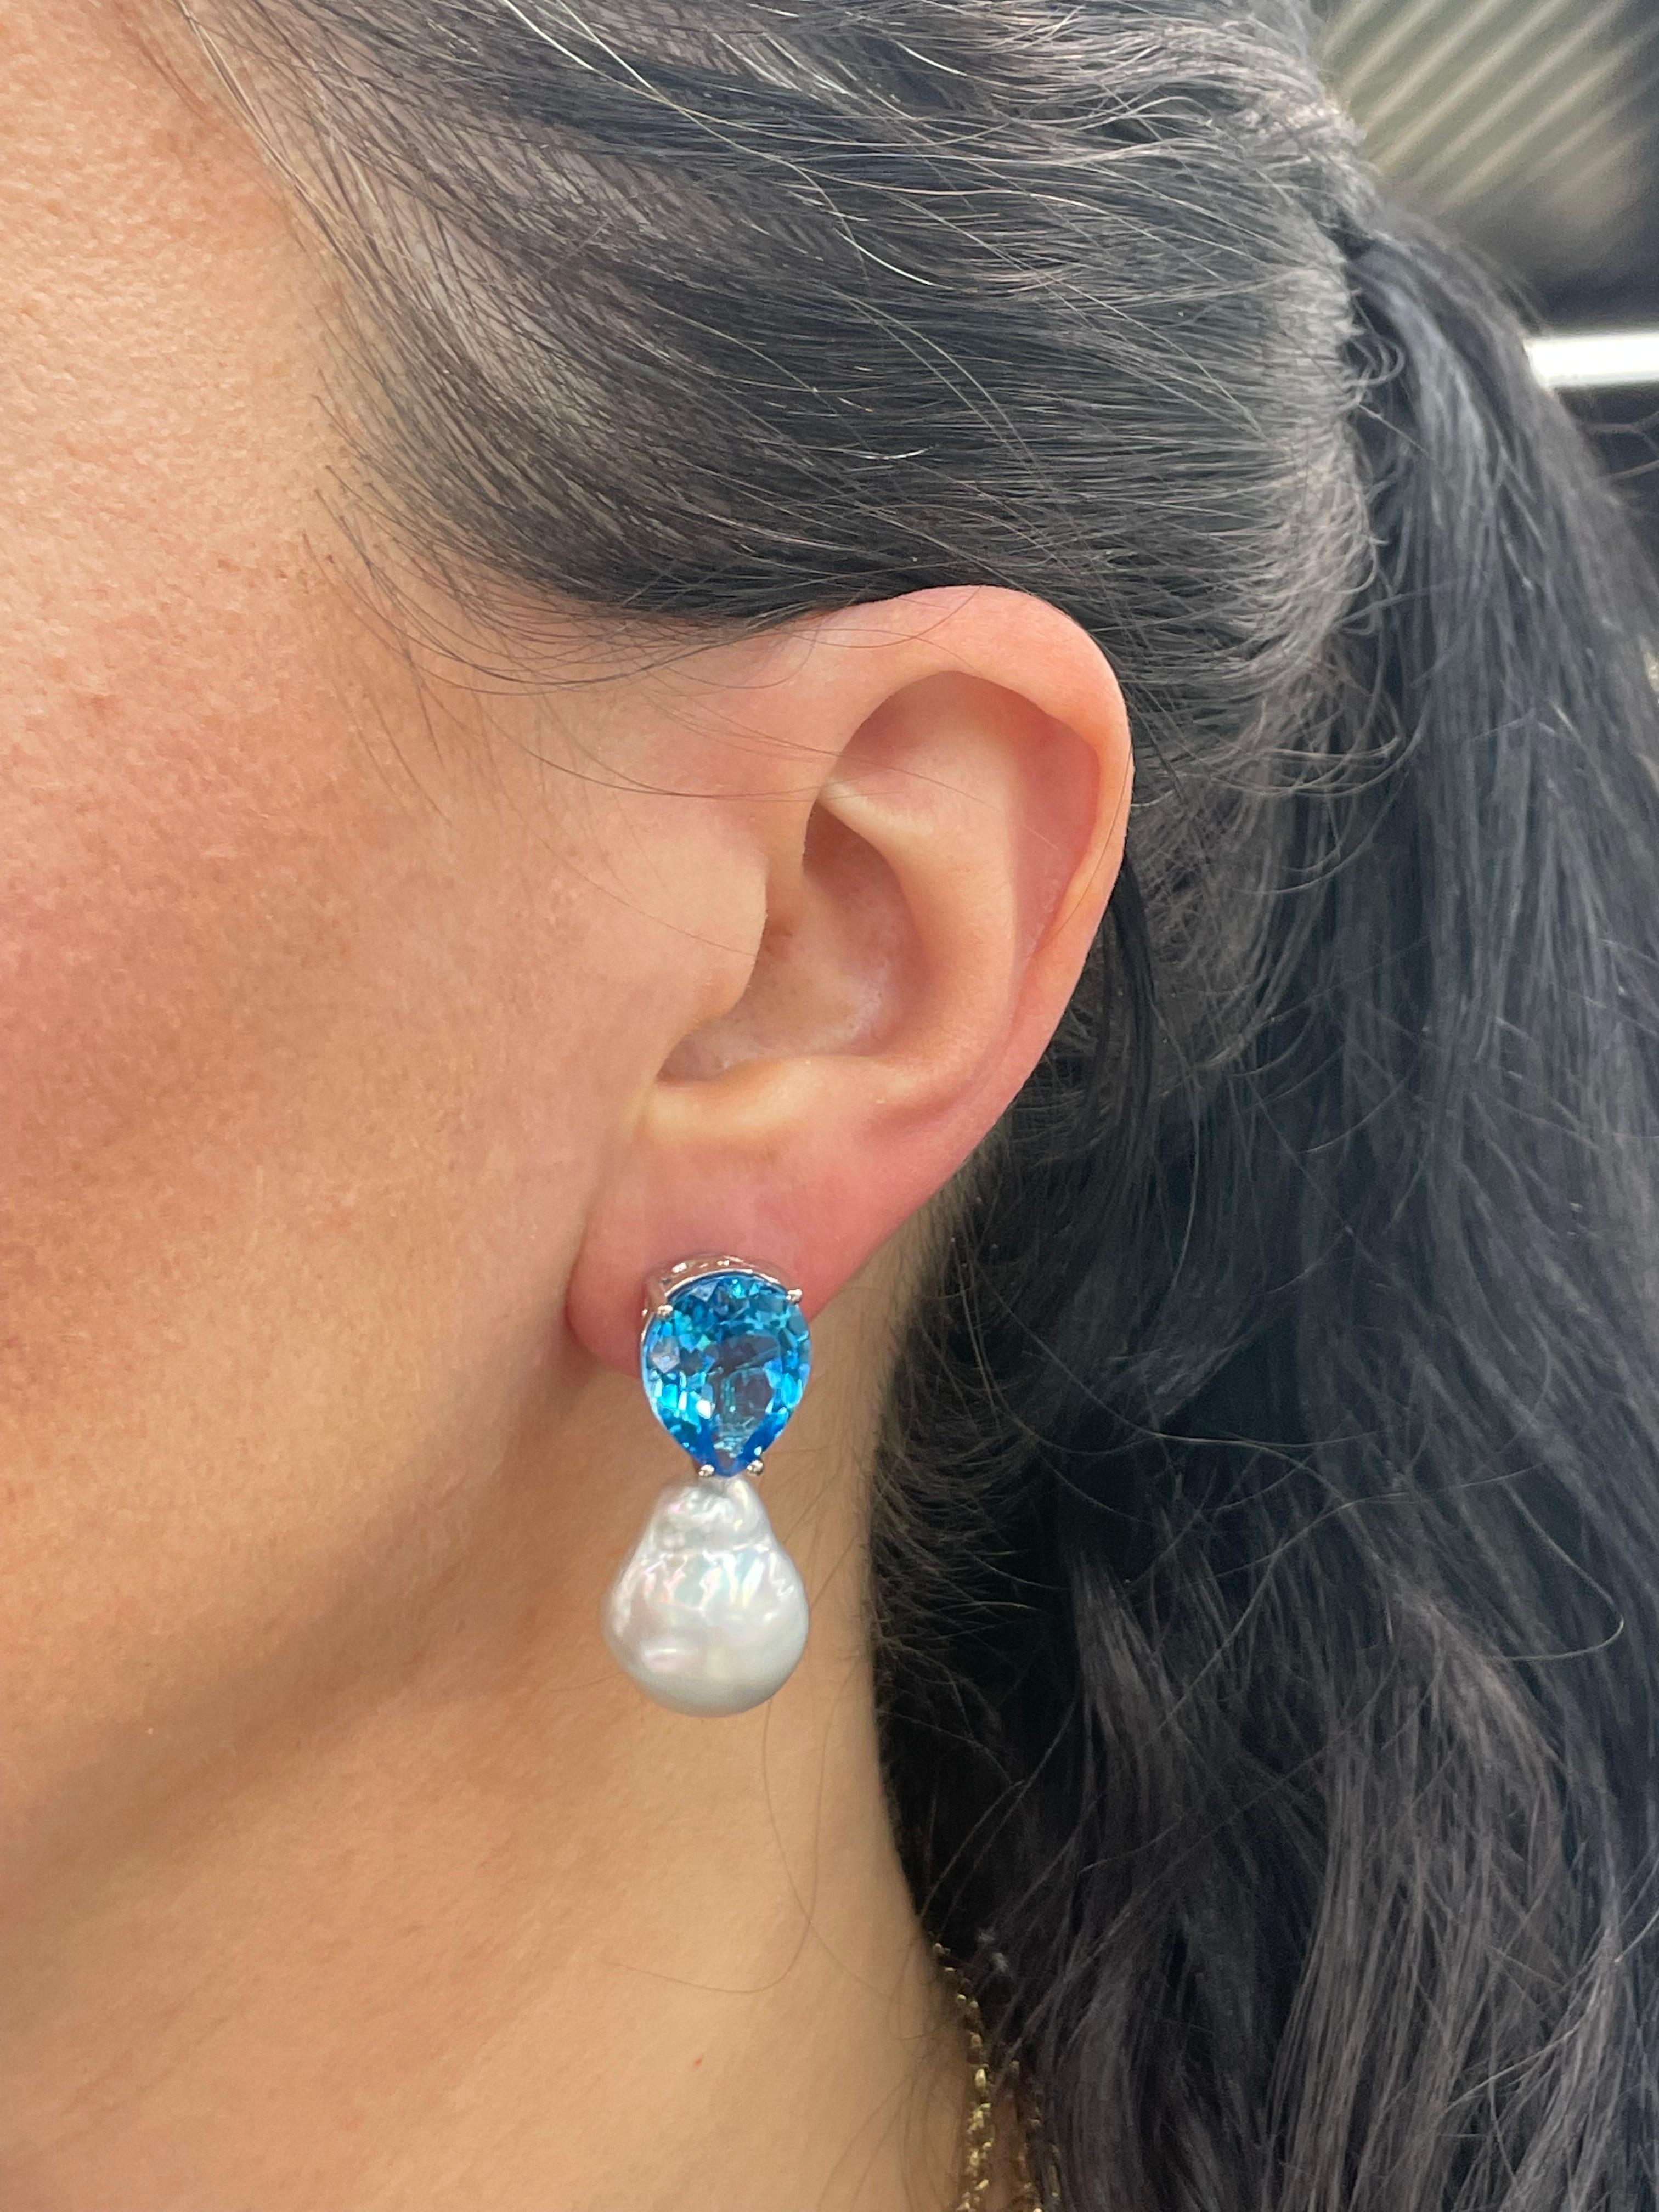 14 Karat White Gold drop earrings featuring two pear shape Blue Topaz weighing 20.79 Carats and two baroque South Sea Pearls measuring 15-16 MM. 
Can customize Pearl color & size.
DM for more information. 